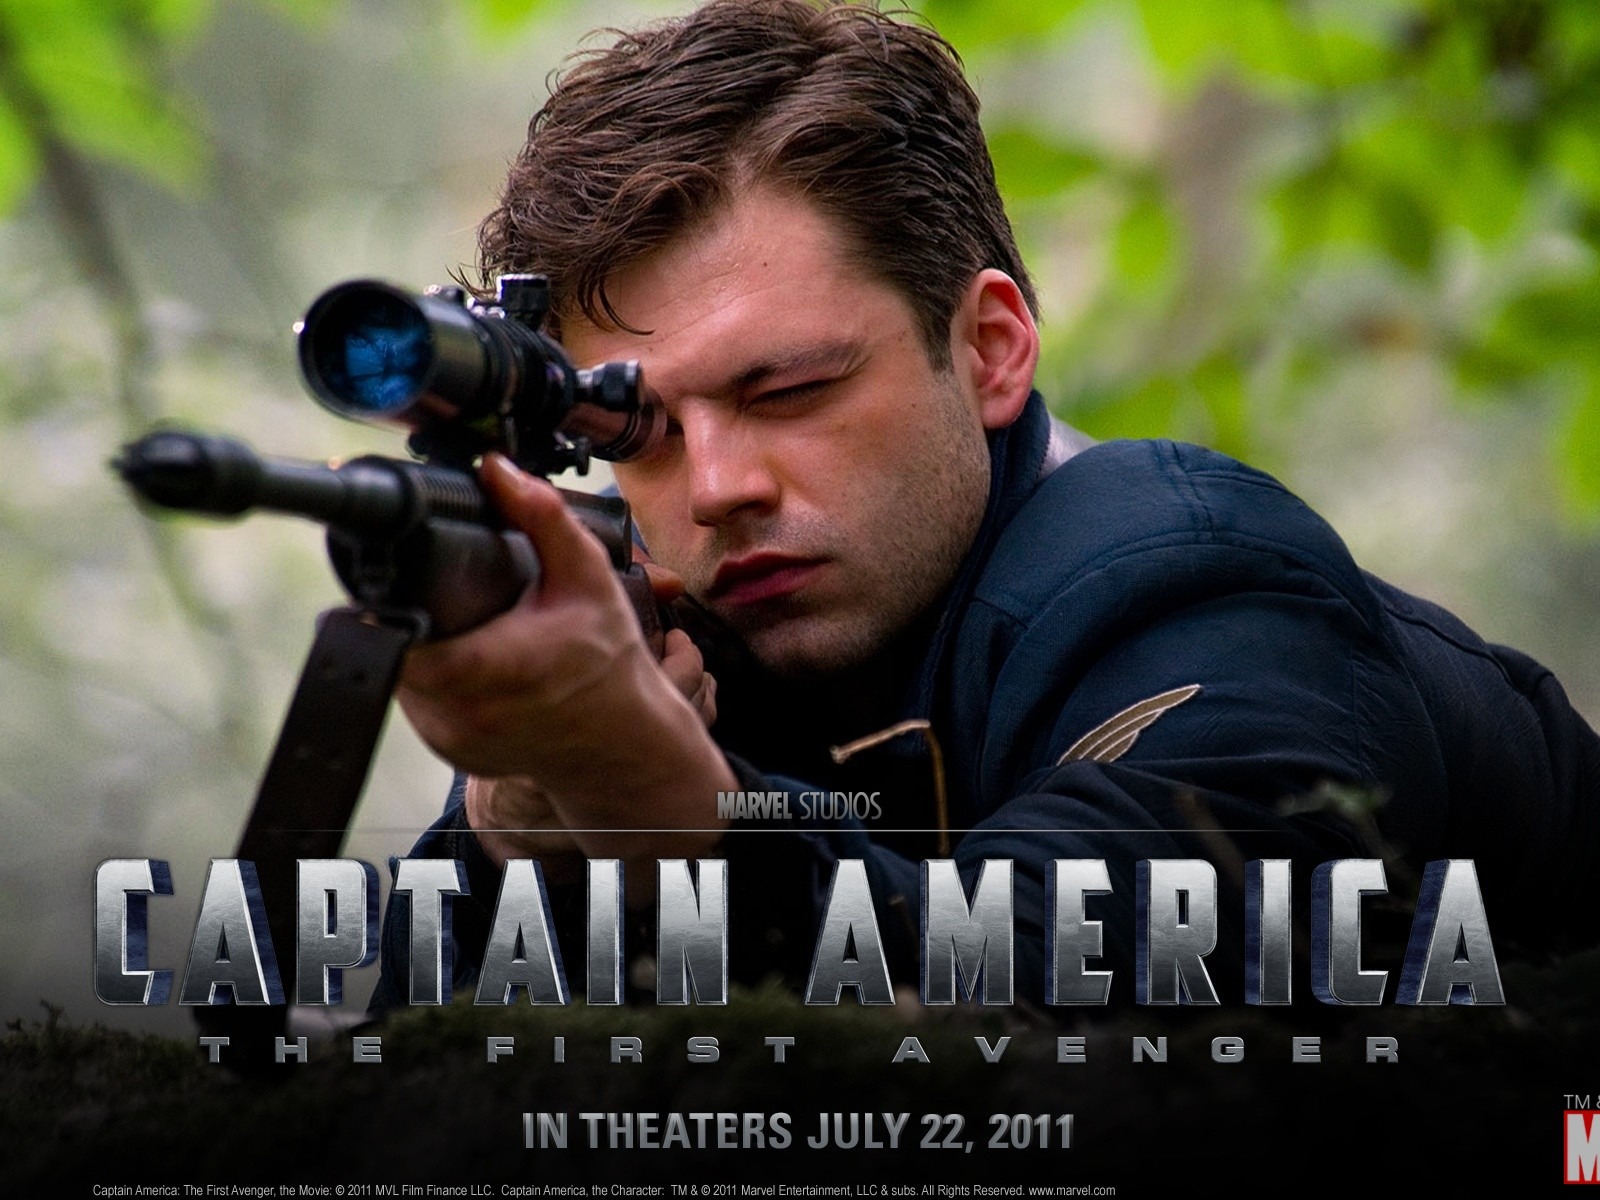 Captain America: The First Avenger wallpapers HD #18 - 1600x1200